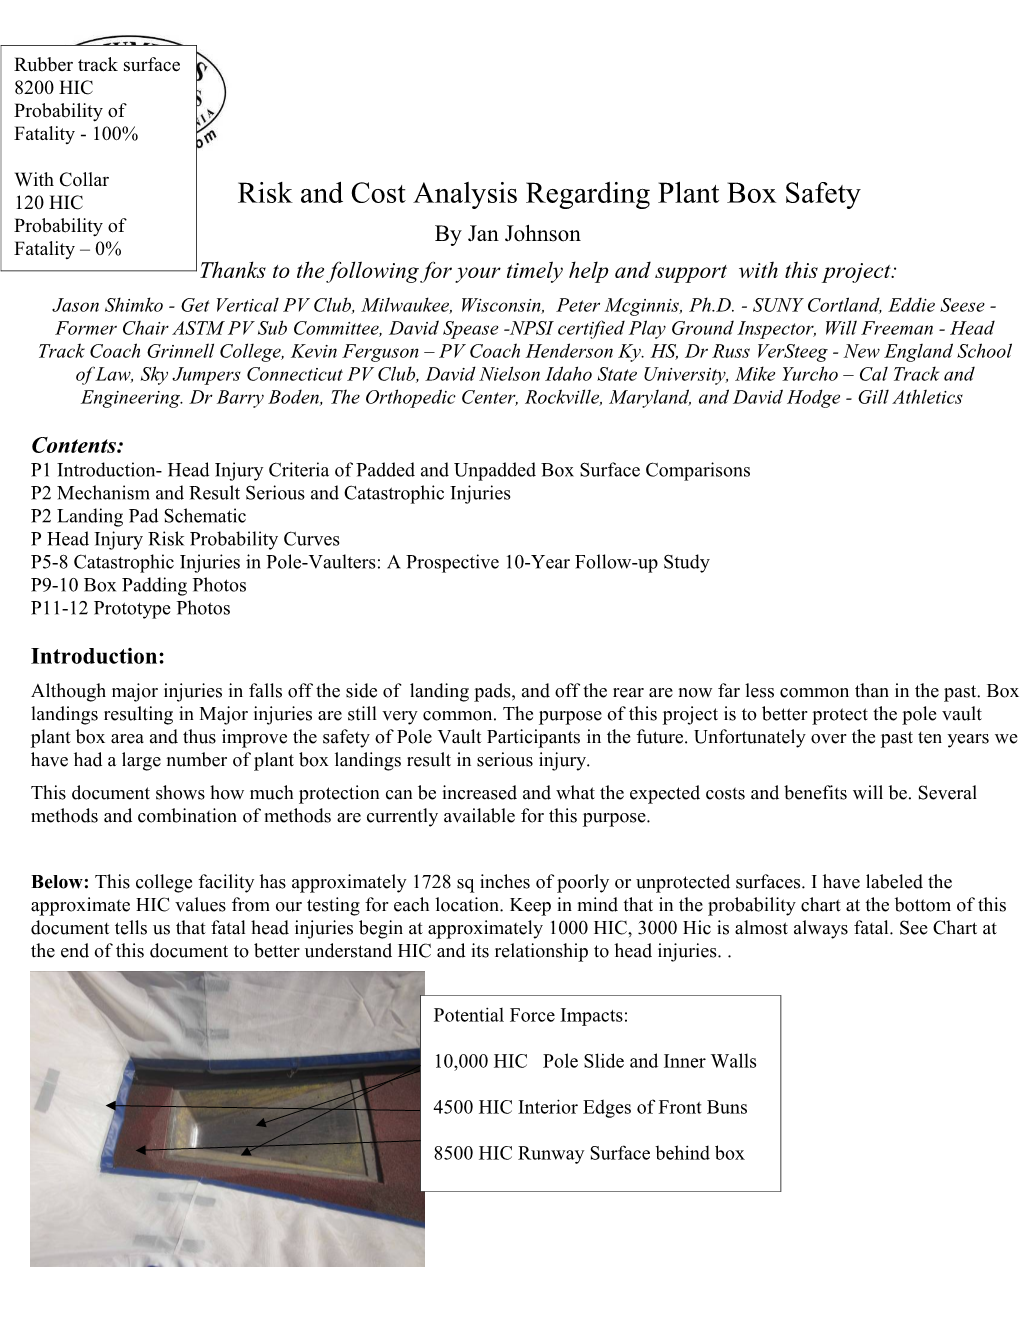 Risk and Cost Analysis Regarding Plant Box Safety